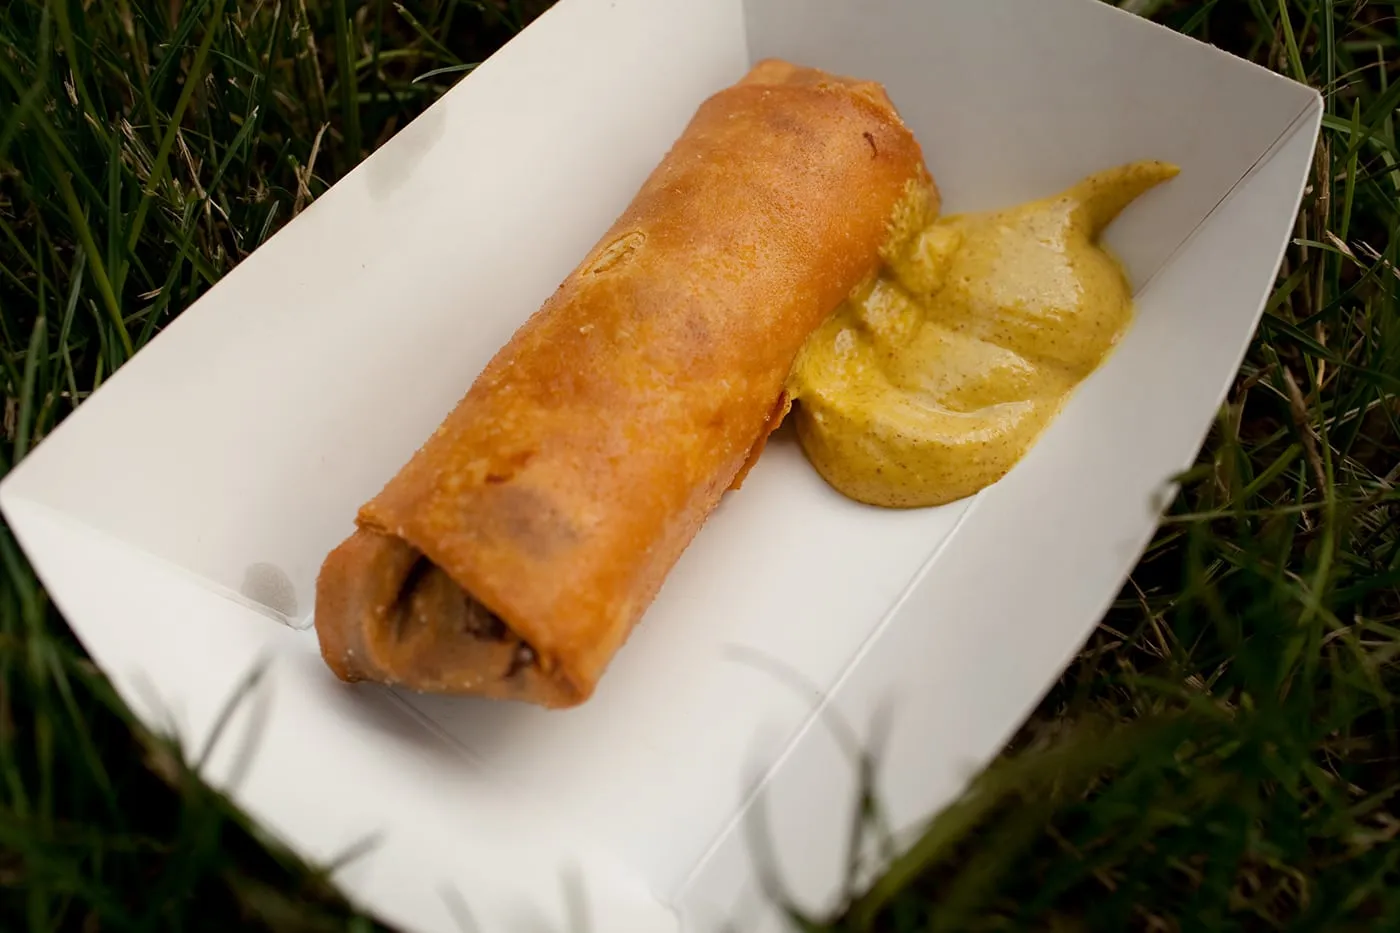 Irish Egg Roll from Abbey Pub at the Taste of Chicago